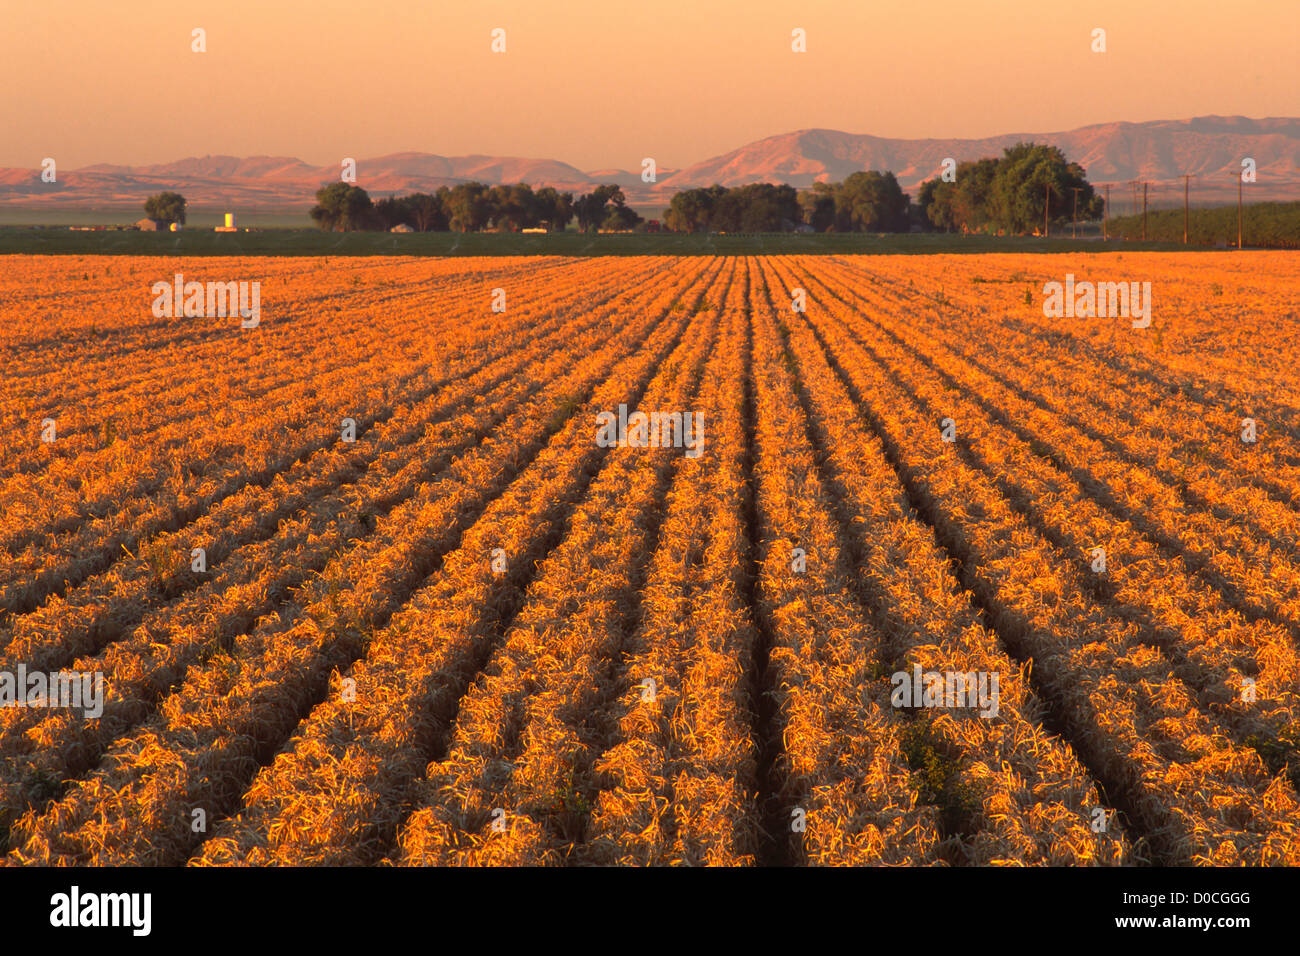 Parallel Rows of a Harvested Garlic Field Stock Photo